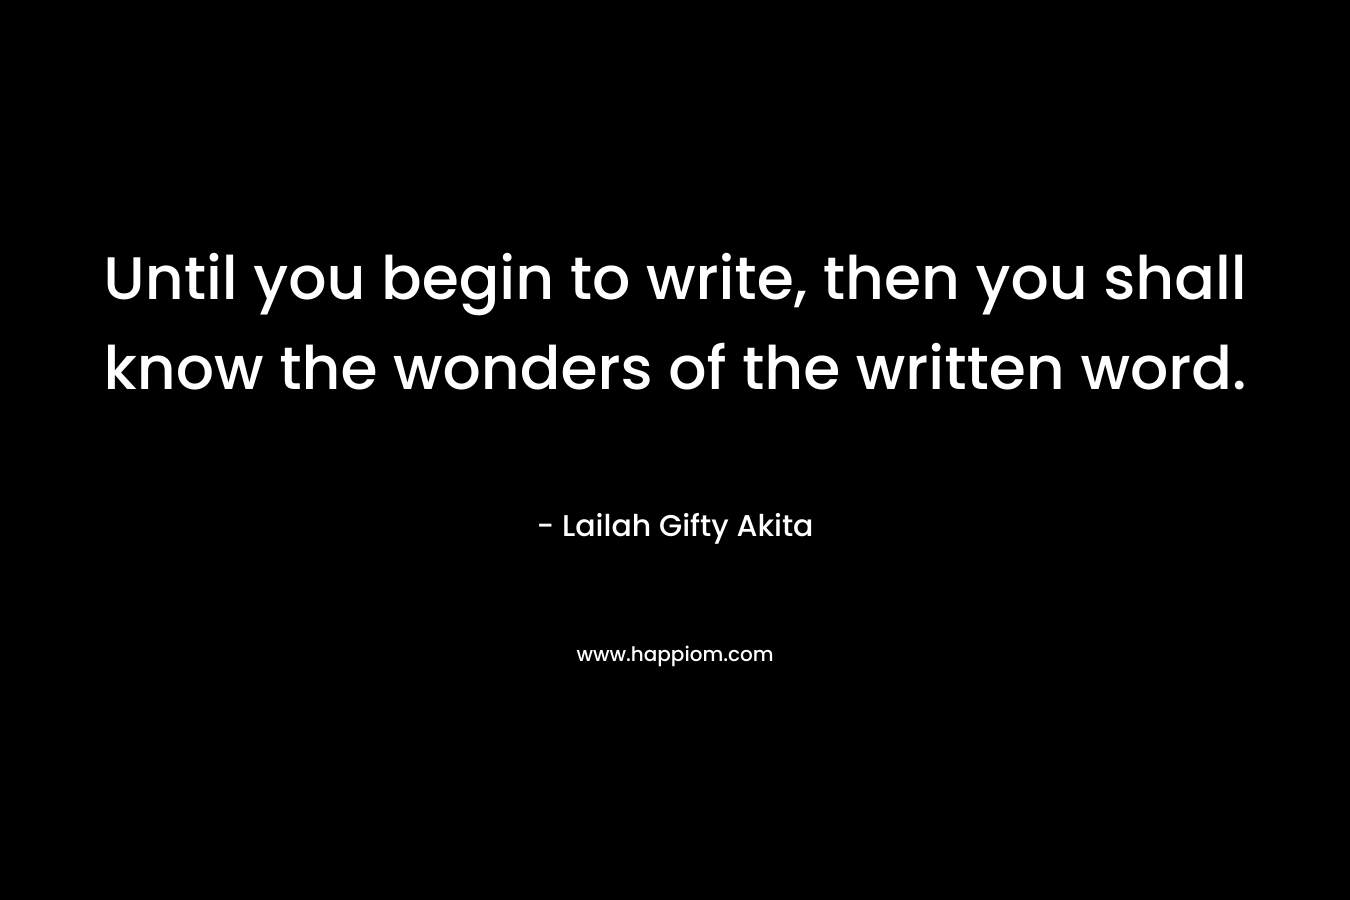 Until you begin to write, then you shall know the wonders of the written word.